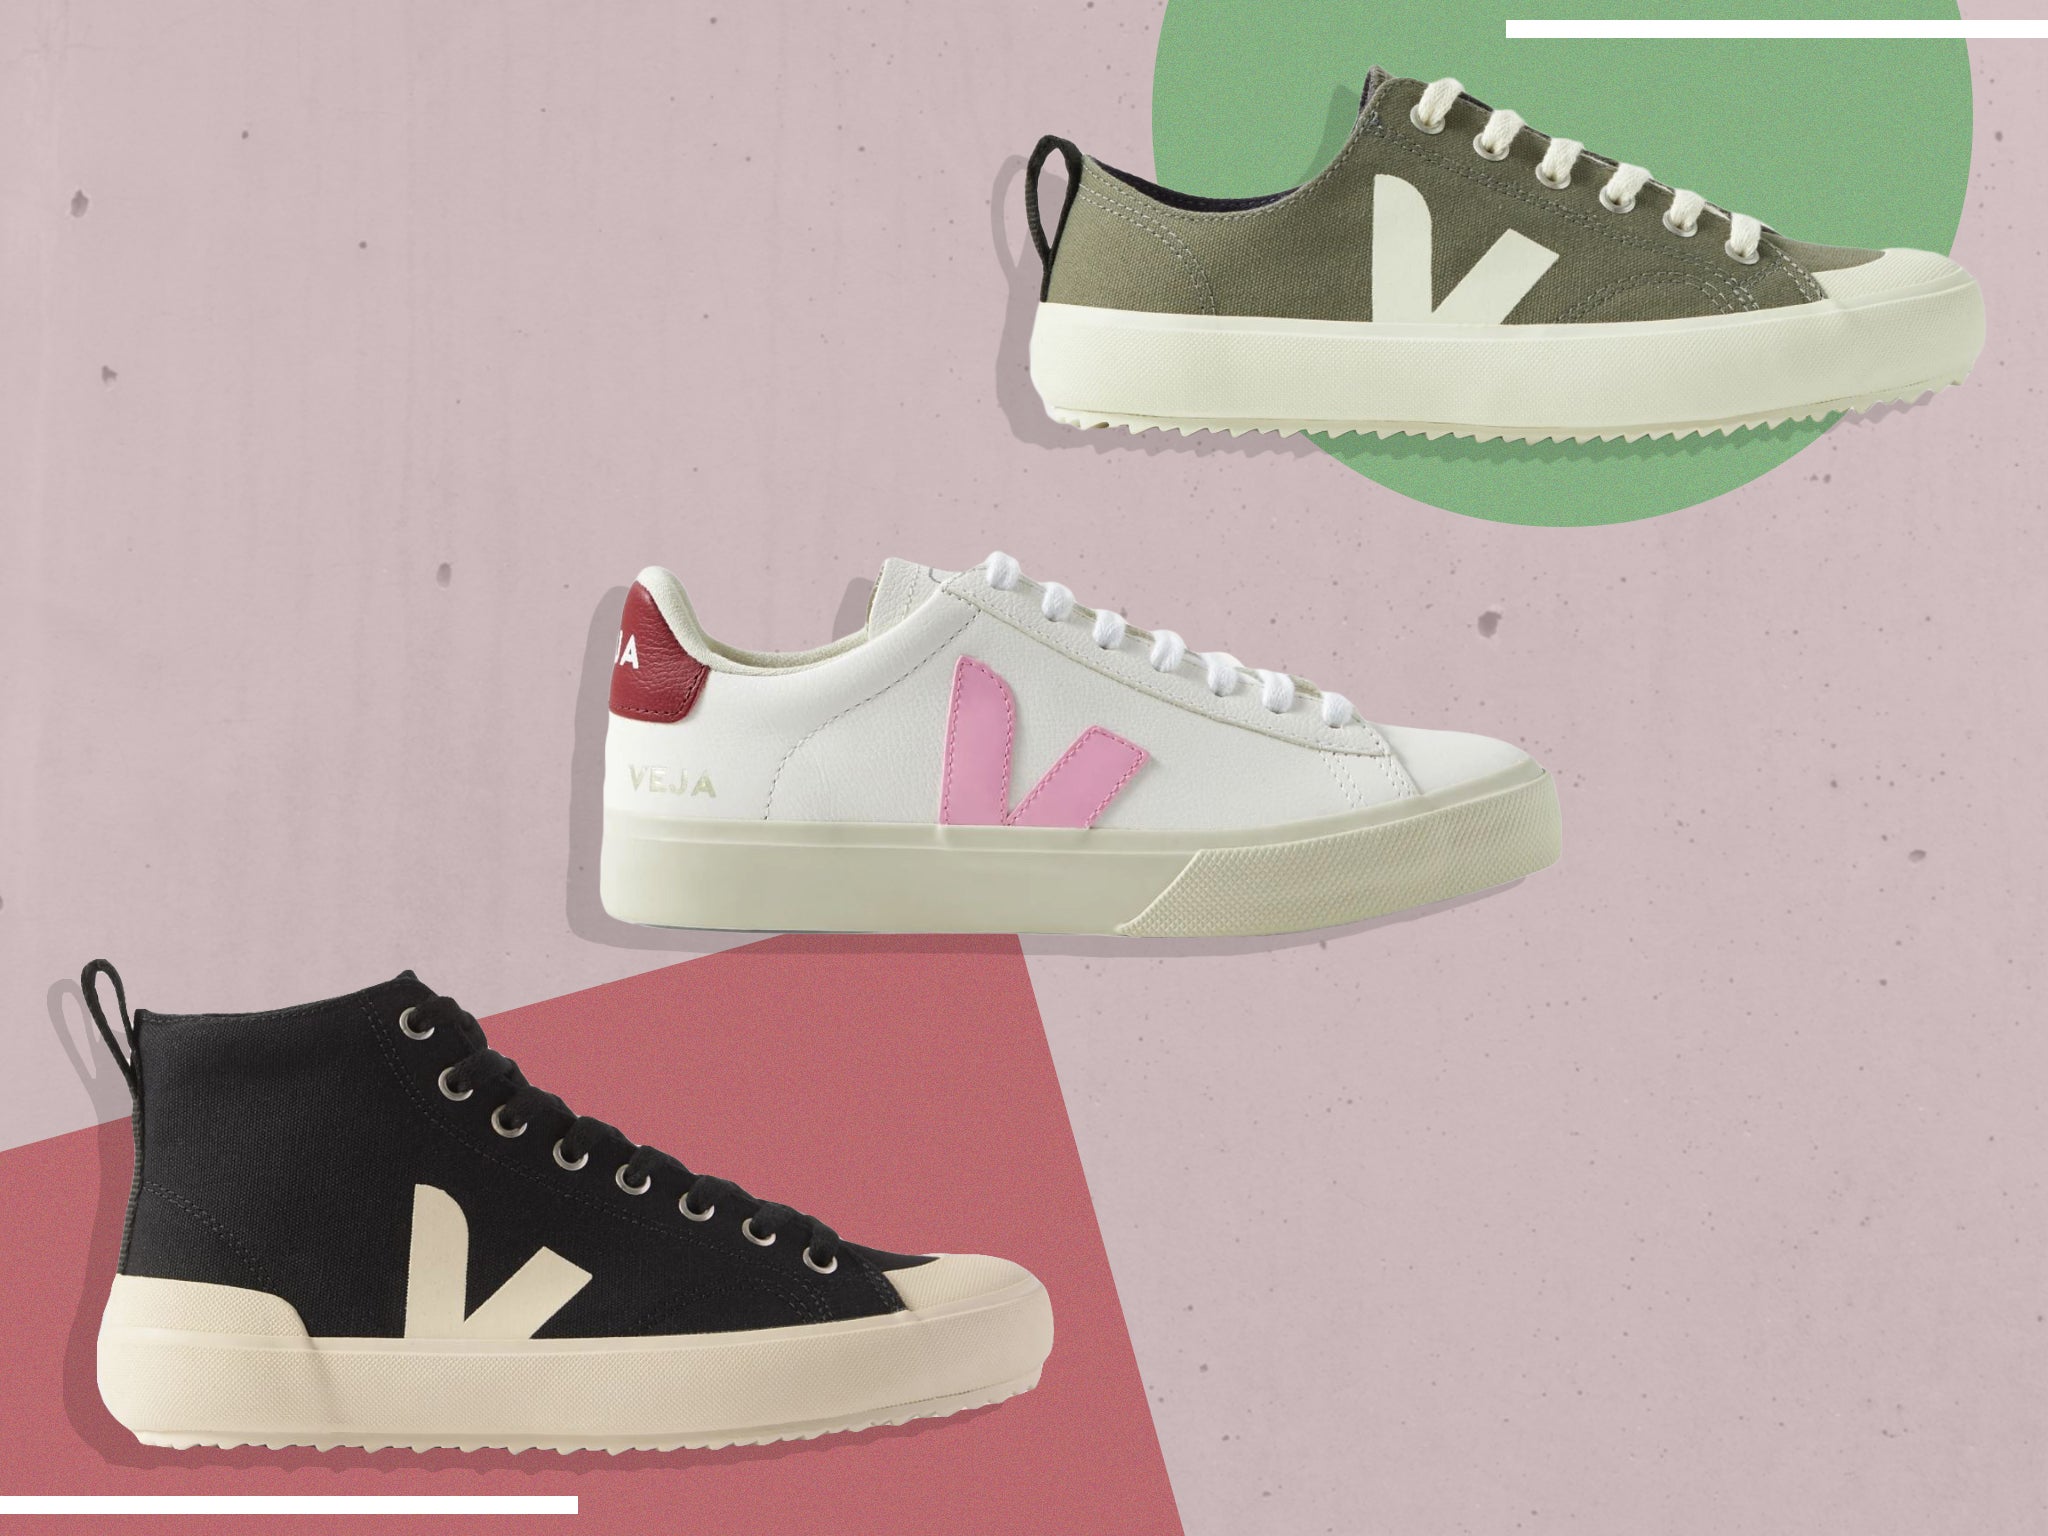 Veja trainers are currently on at | Independent